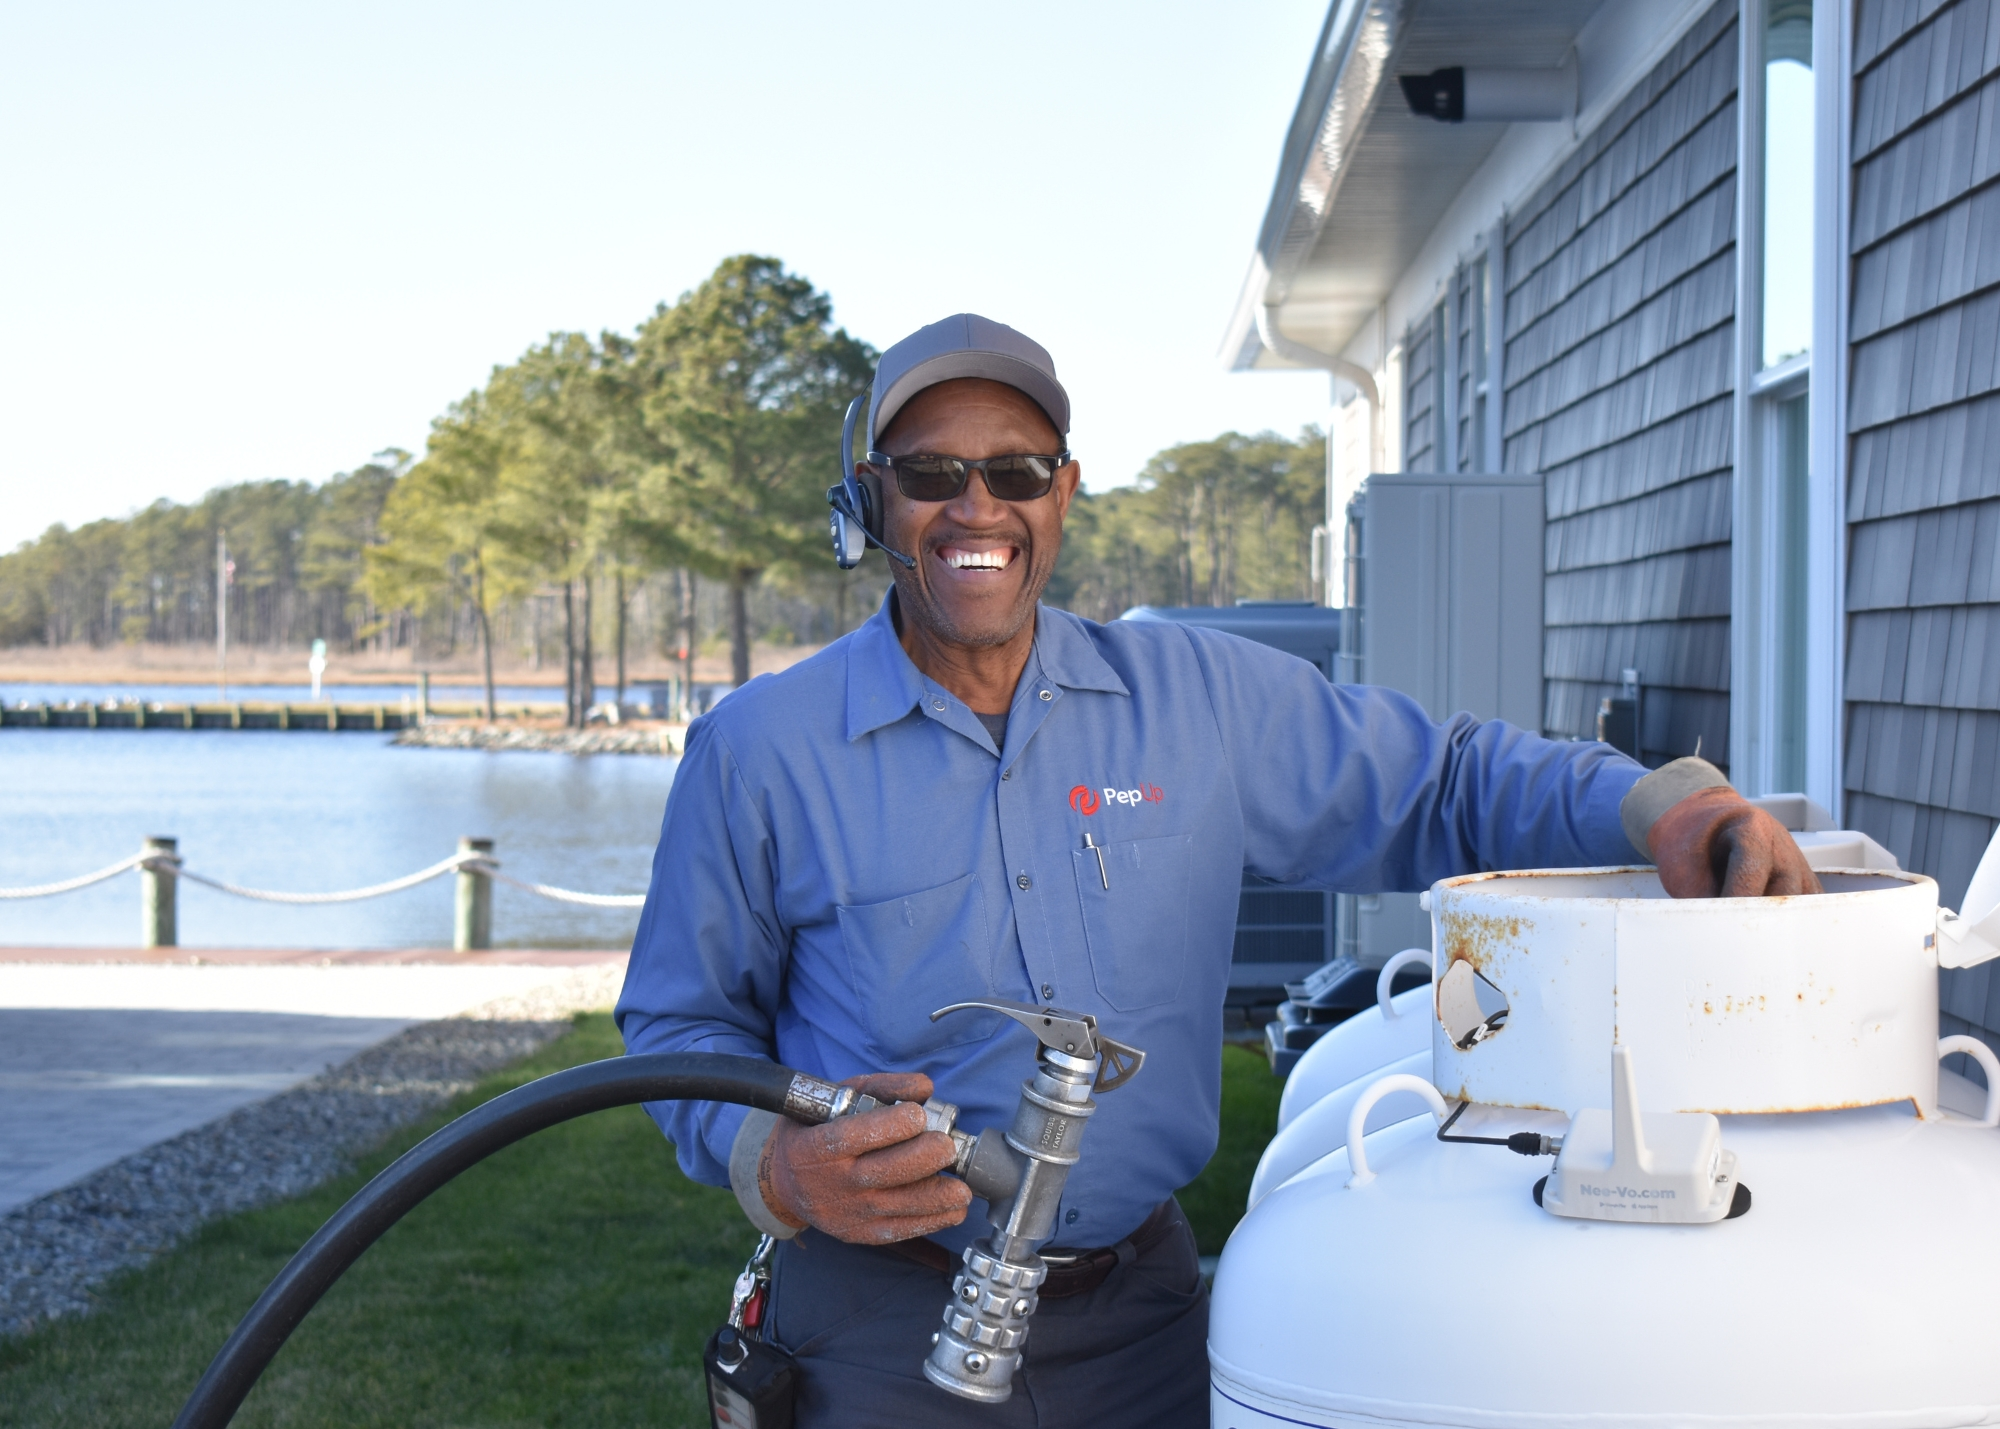 An image of PepUp Delivery Driver Ben Fulton preparing to fill a customer's propane tank.